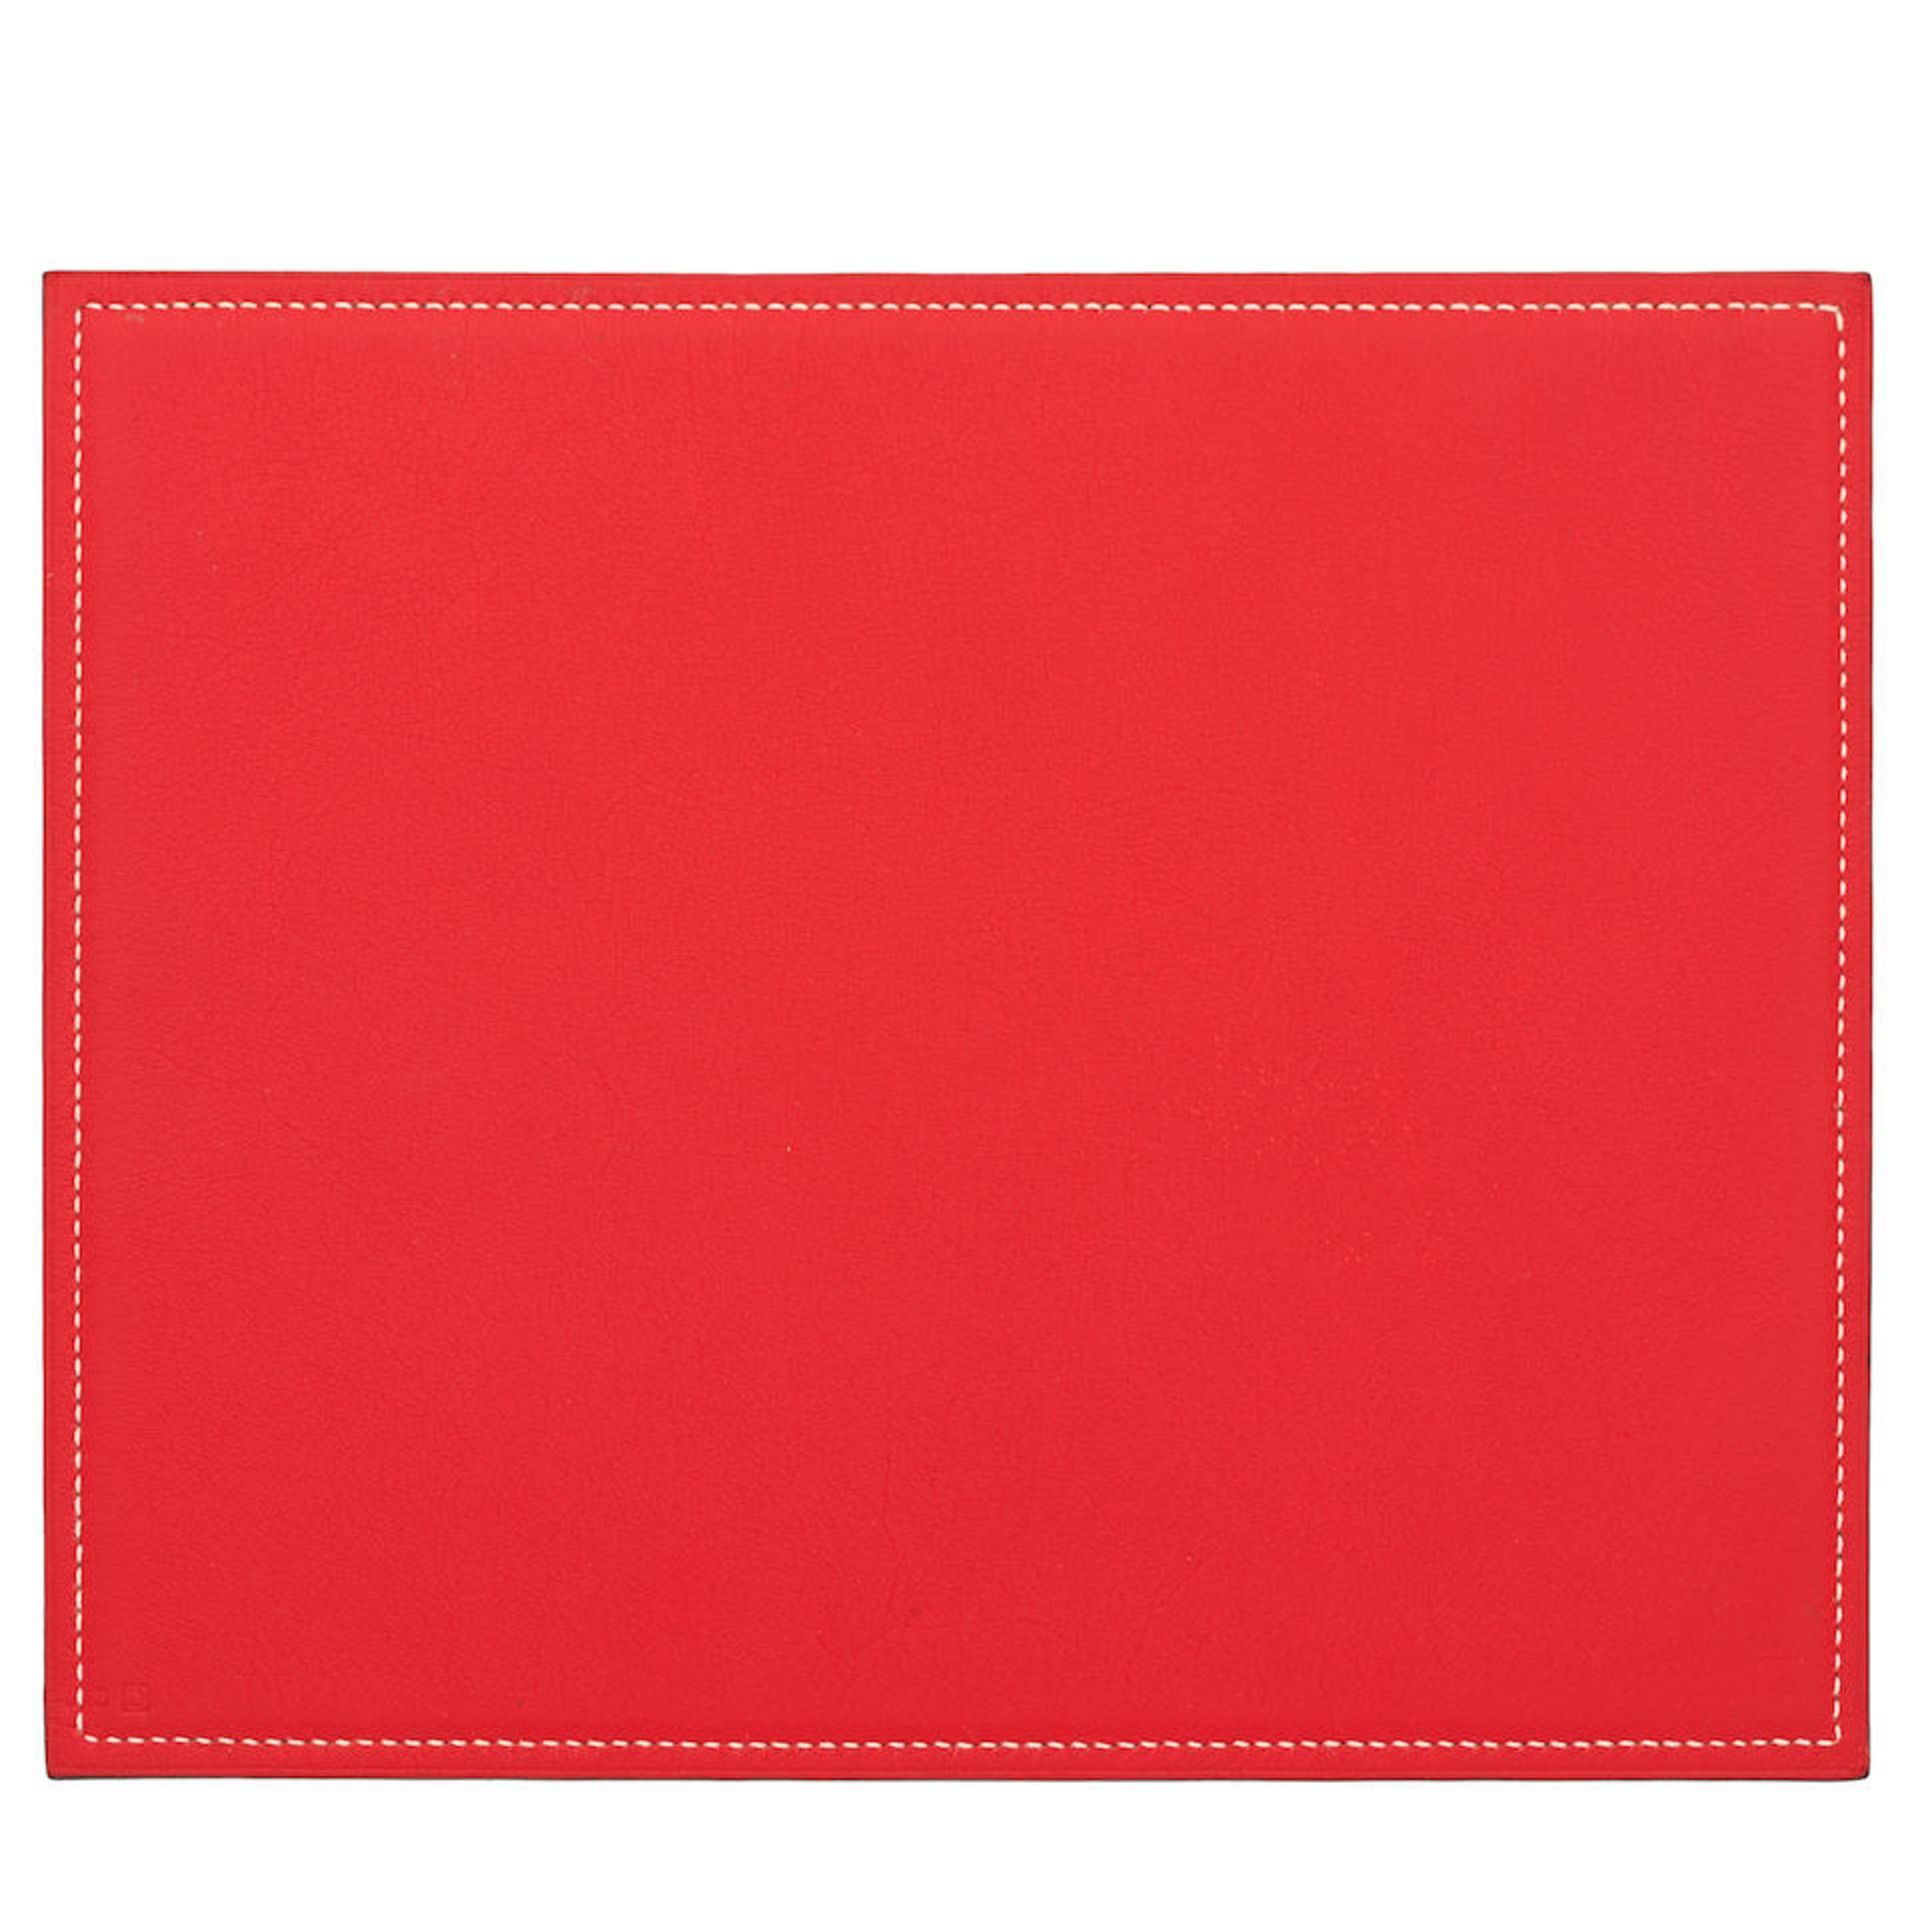 Hermès: a Rouge H and Rouge Vif Leather Mousepad 2000 - Image 2 of 3